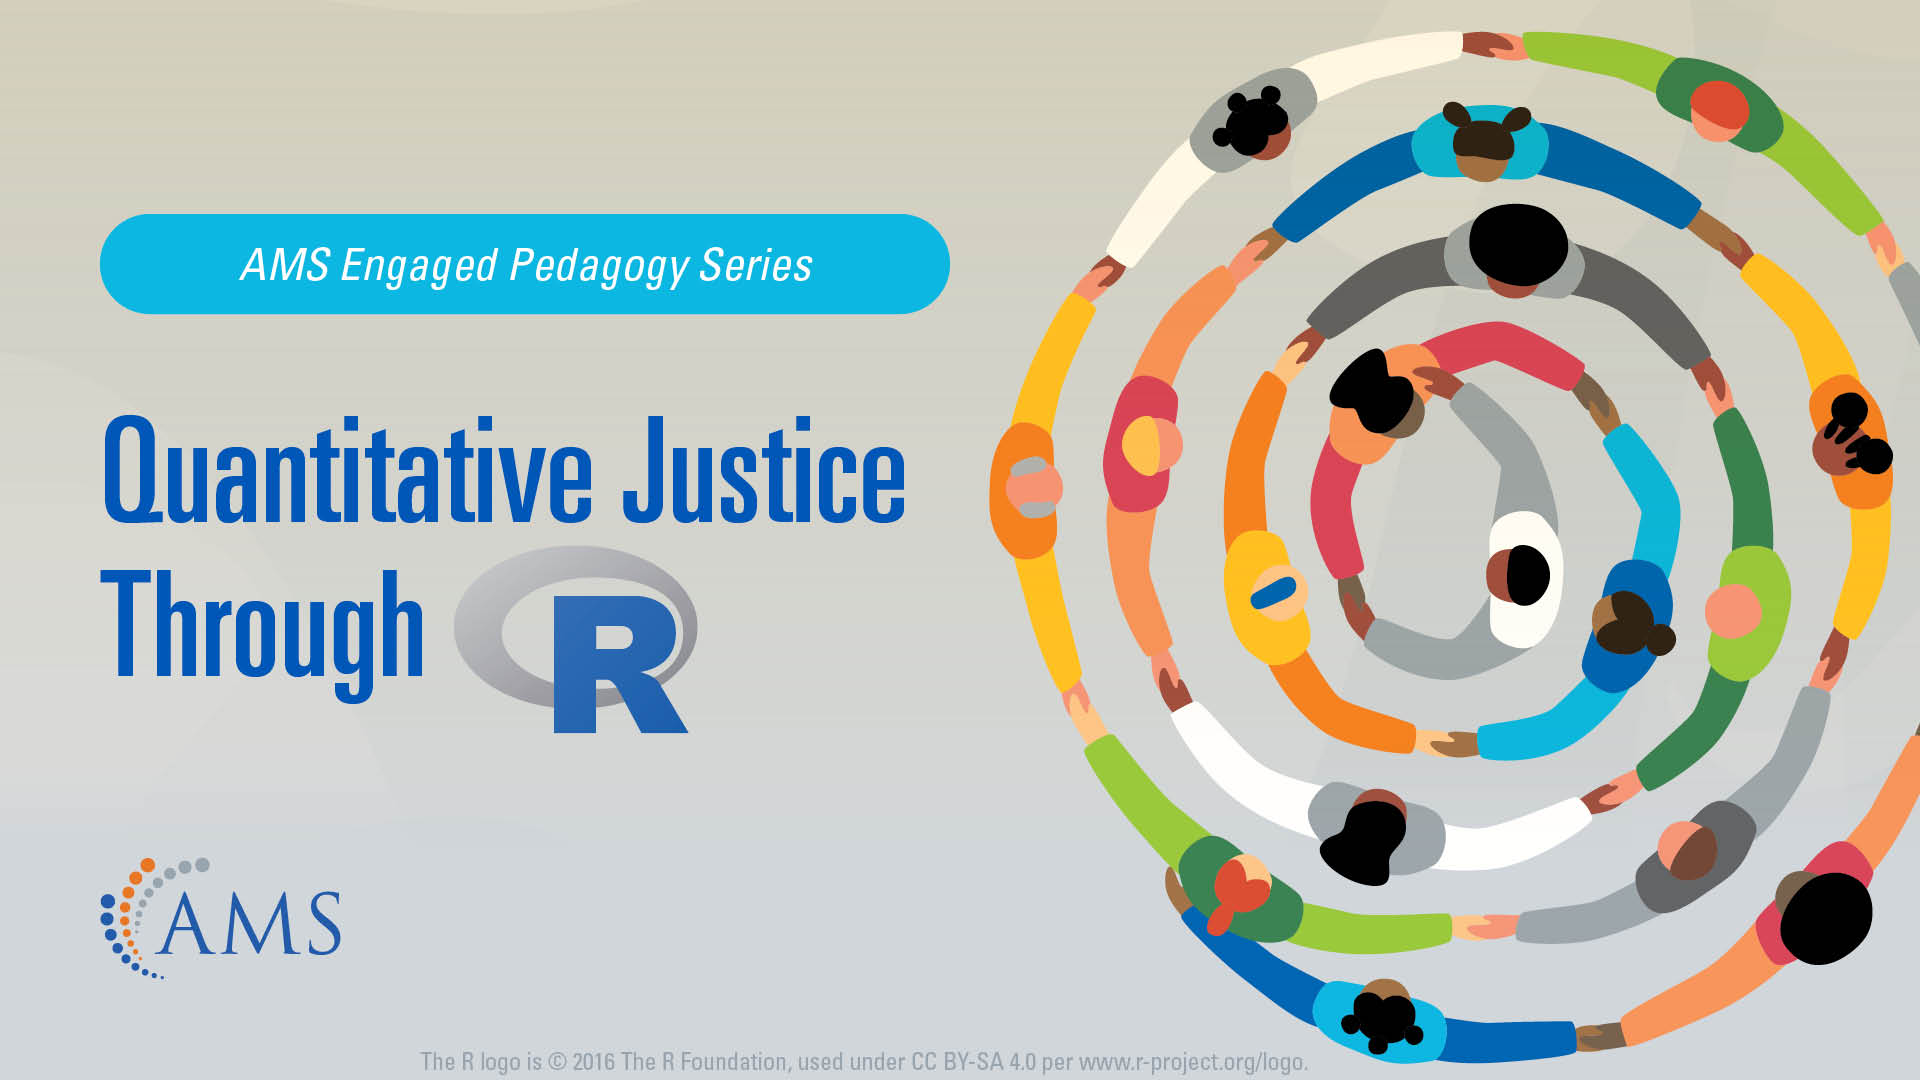 AMS Engaged Pedagogy Series: Quantitative Justice Through R, with R logo and image of a circle of diverse people